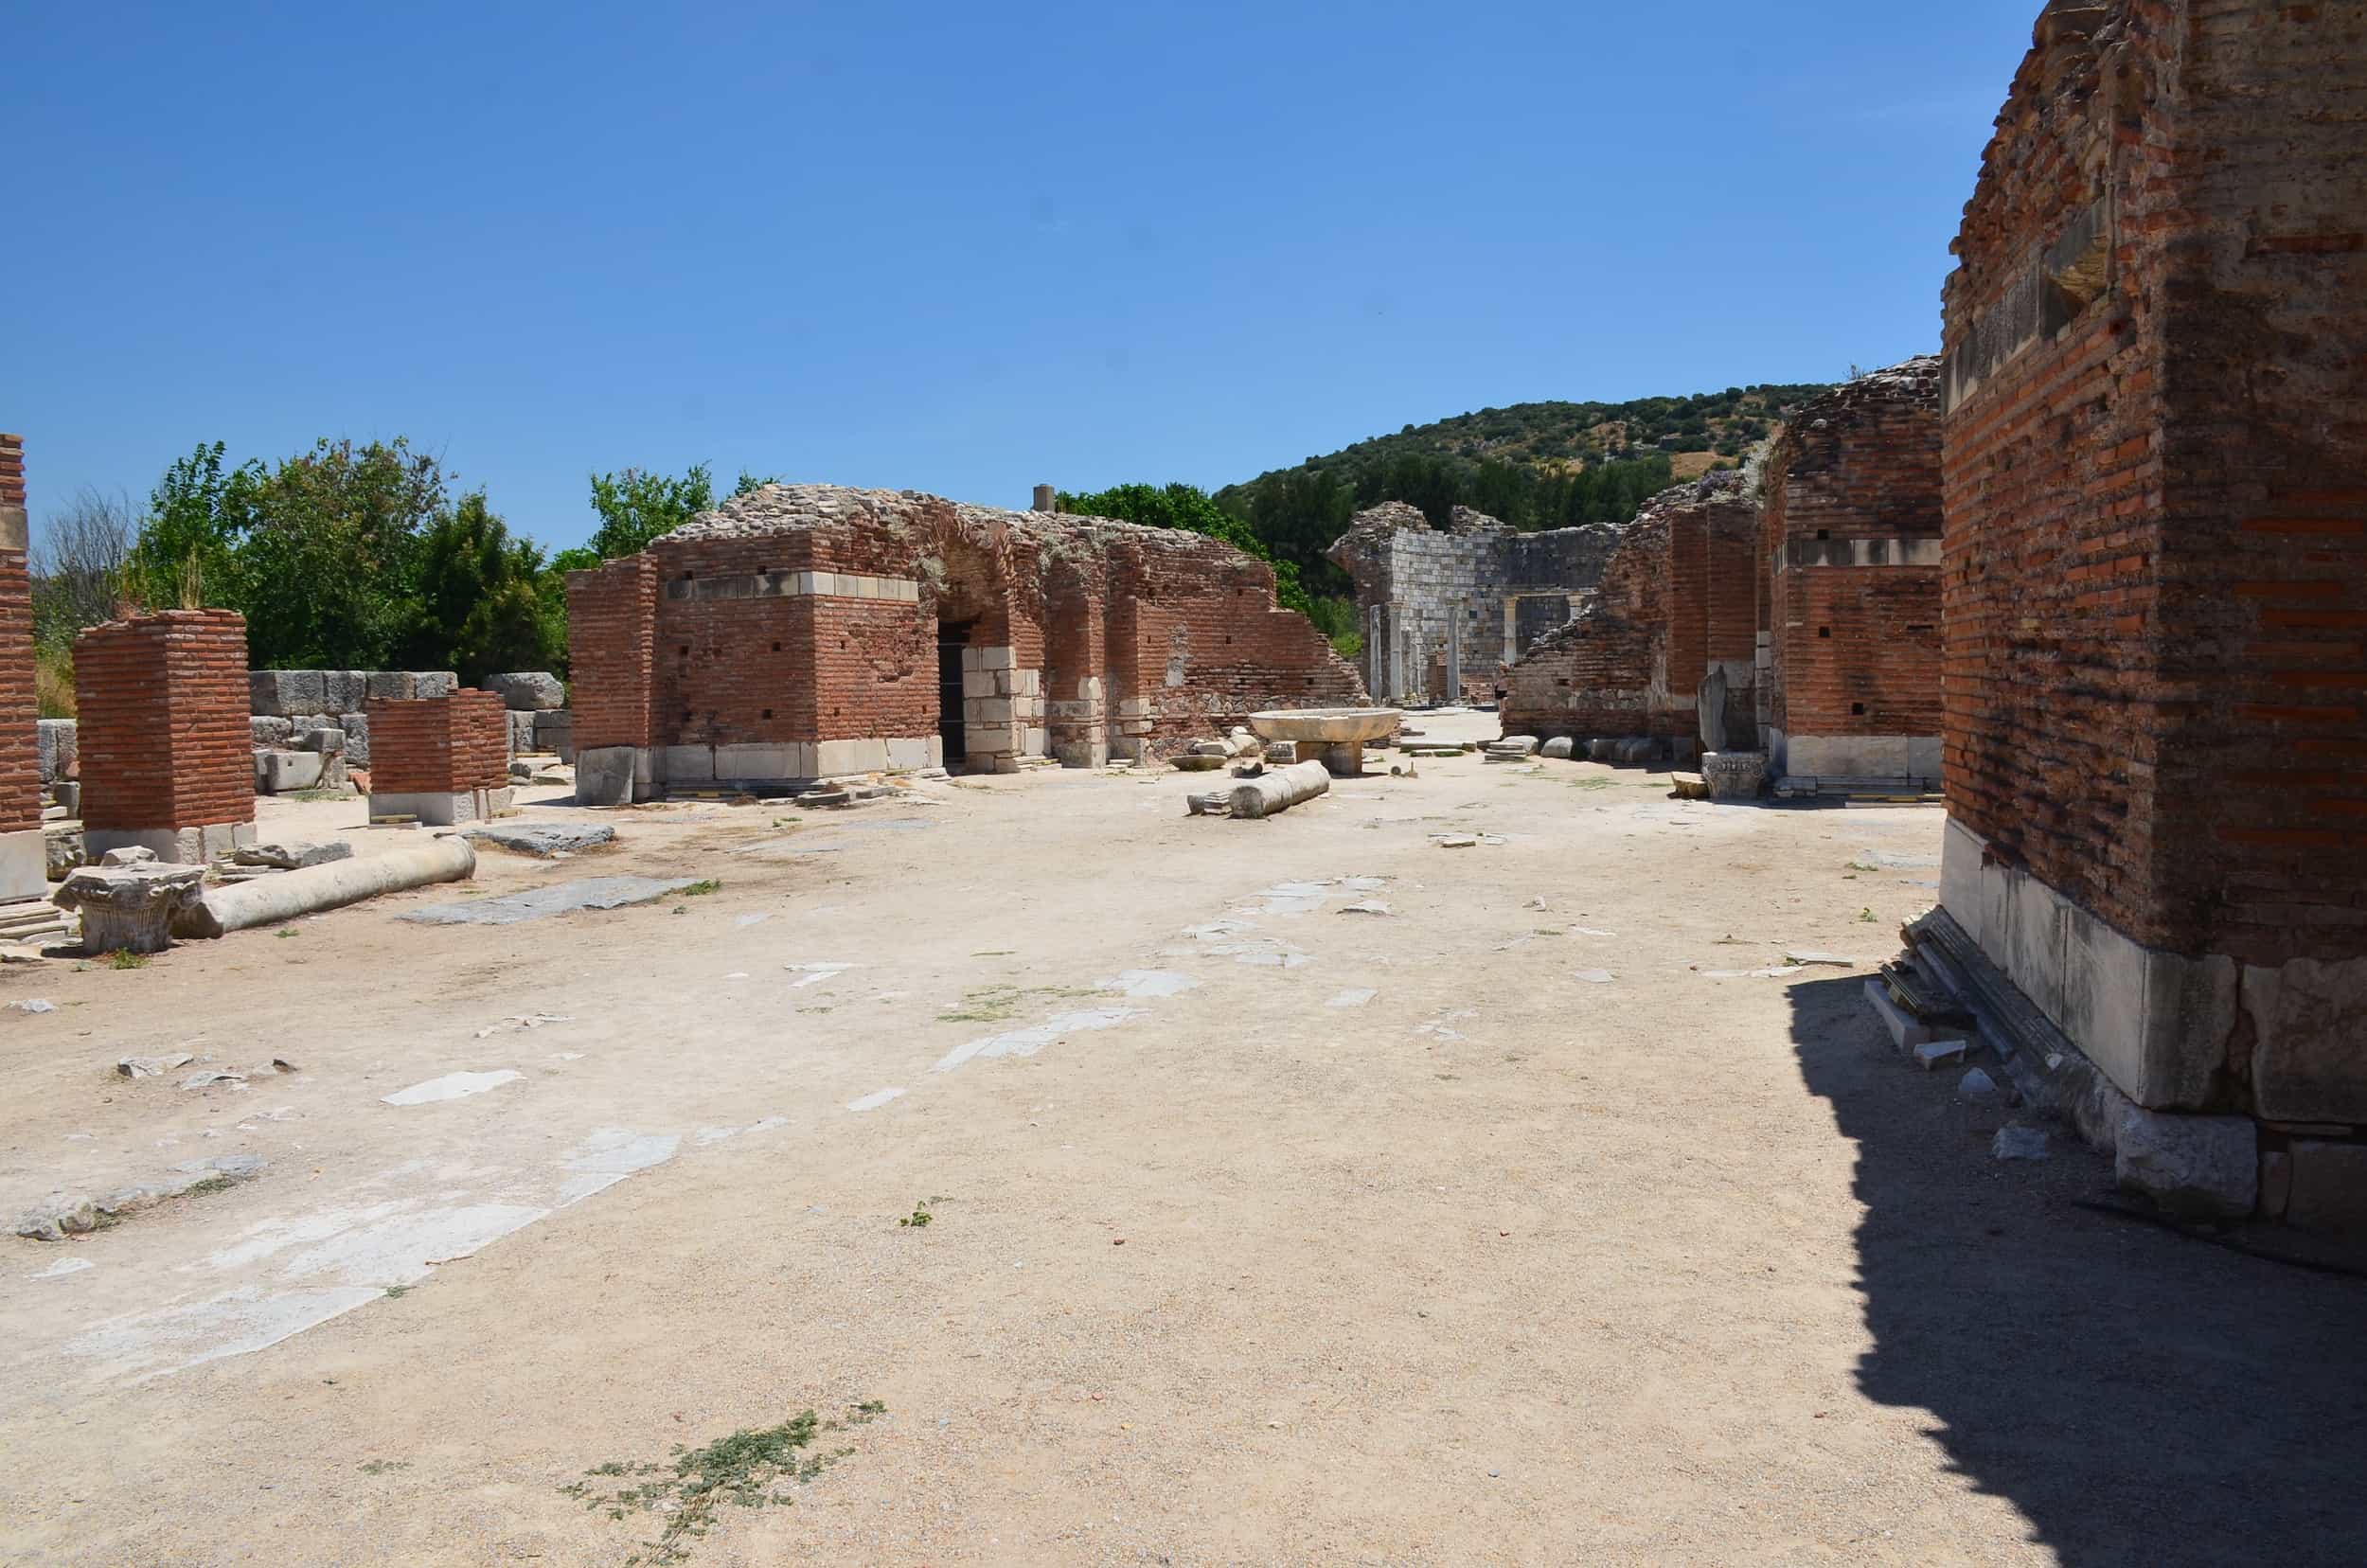 Domed church in the western part of the original nave, looking east at the Church of Mary at Ephesus